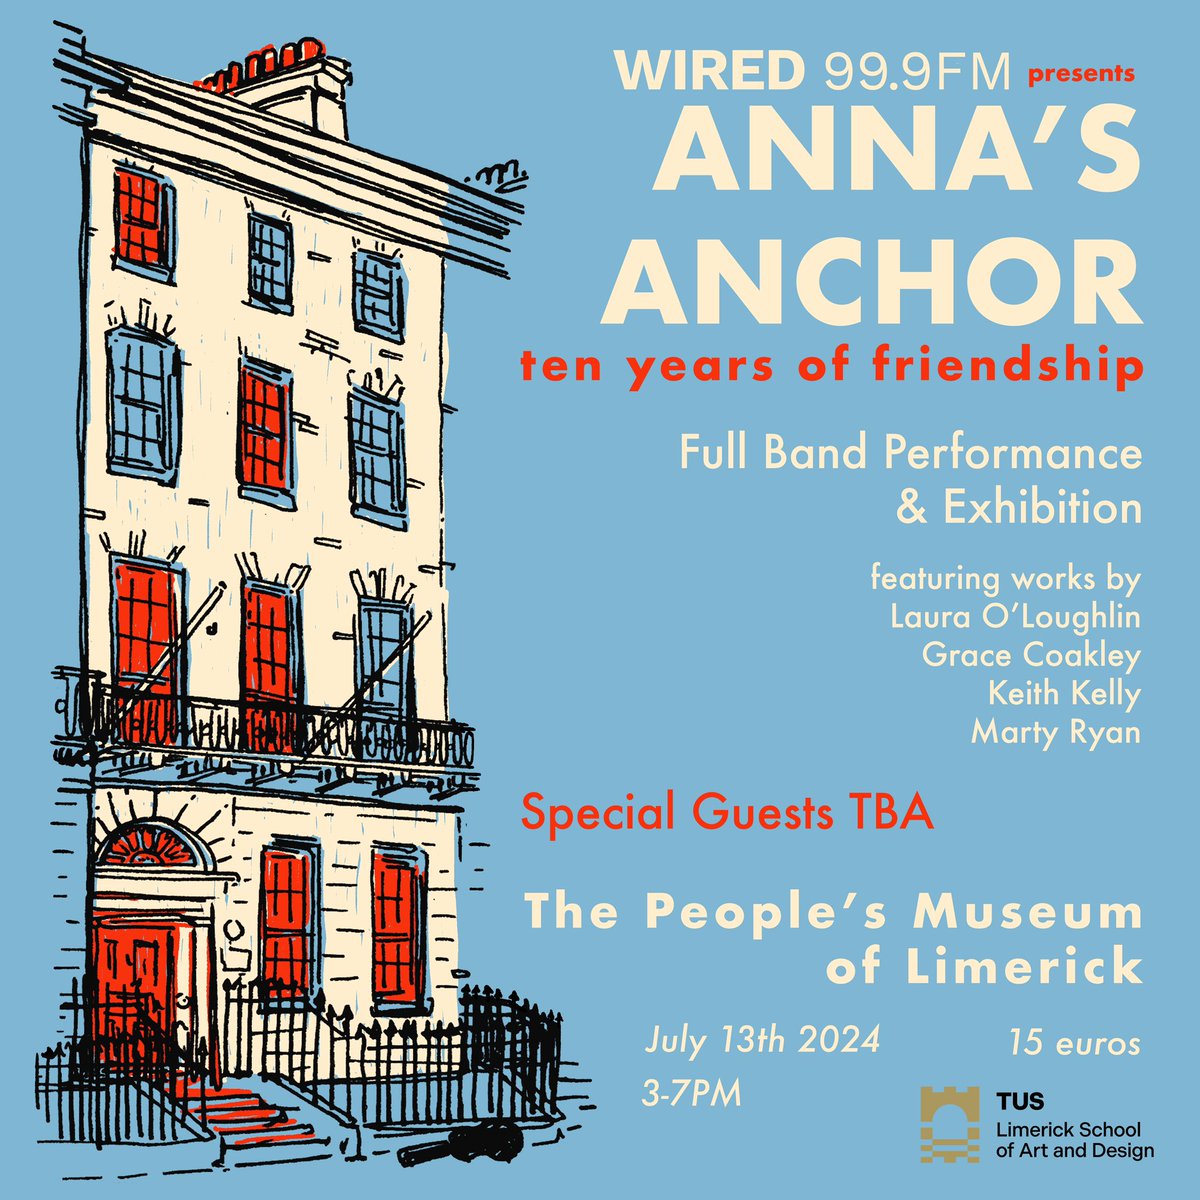 10 years of Friendship. An exhibition and full band gig in @PeoplesMuseumLK on July 13th featuring work from some of our best friends and longtime collaborators ! Thank you @wiredfm for making this possible. Very limited tickets available now at tinyurl.com/6bwht3kf #limerick